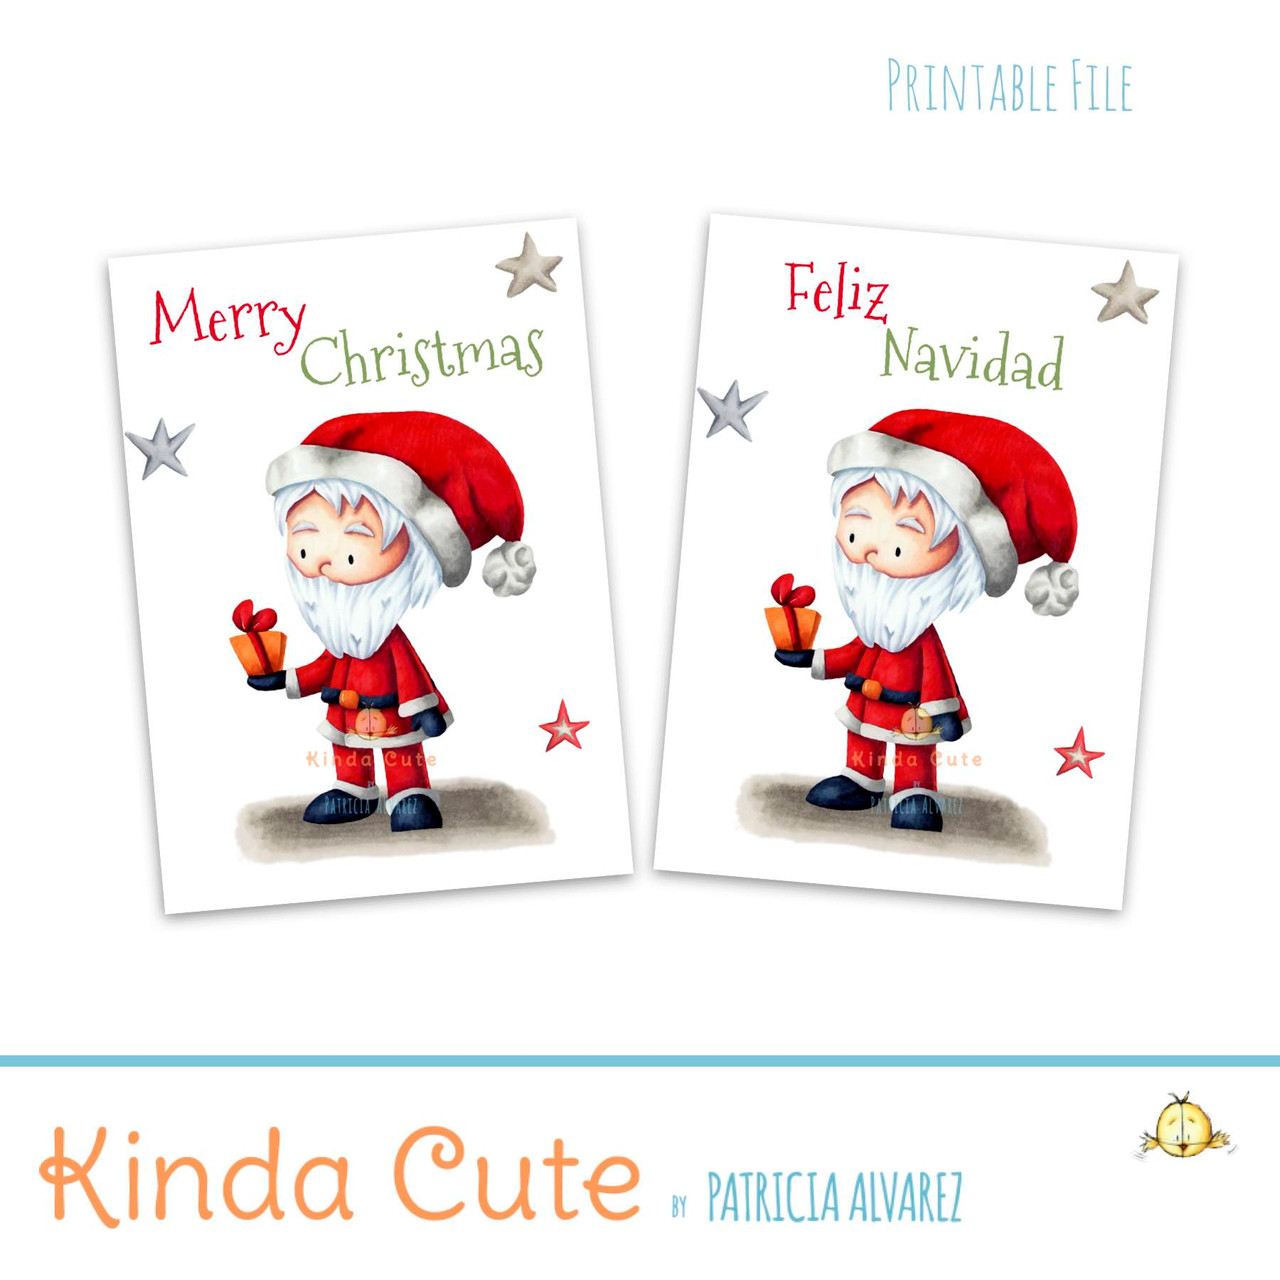 Santa Claus Cut Out Template from cdn11.bigcommerce.com